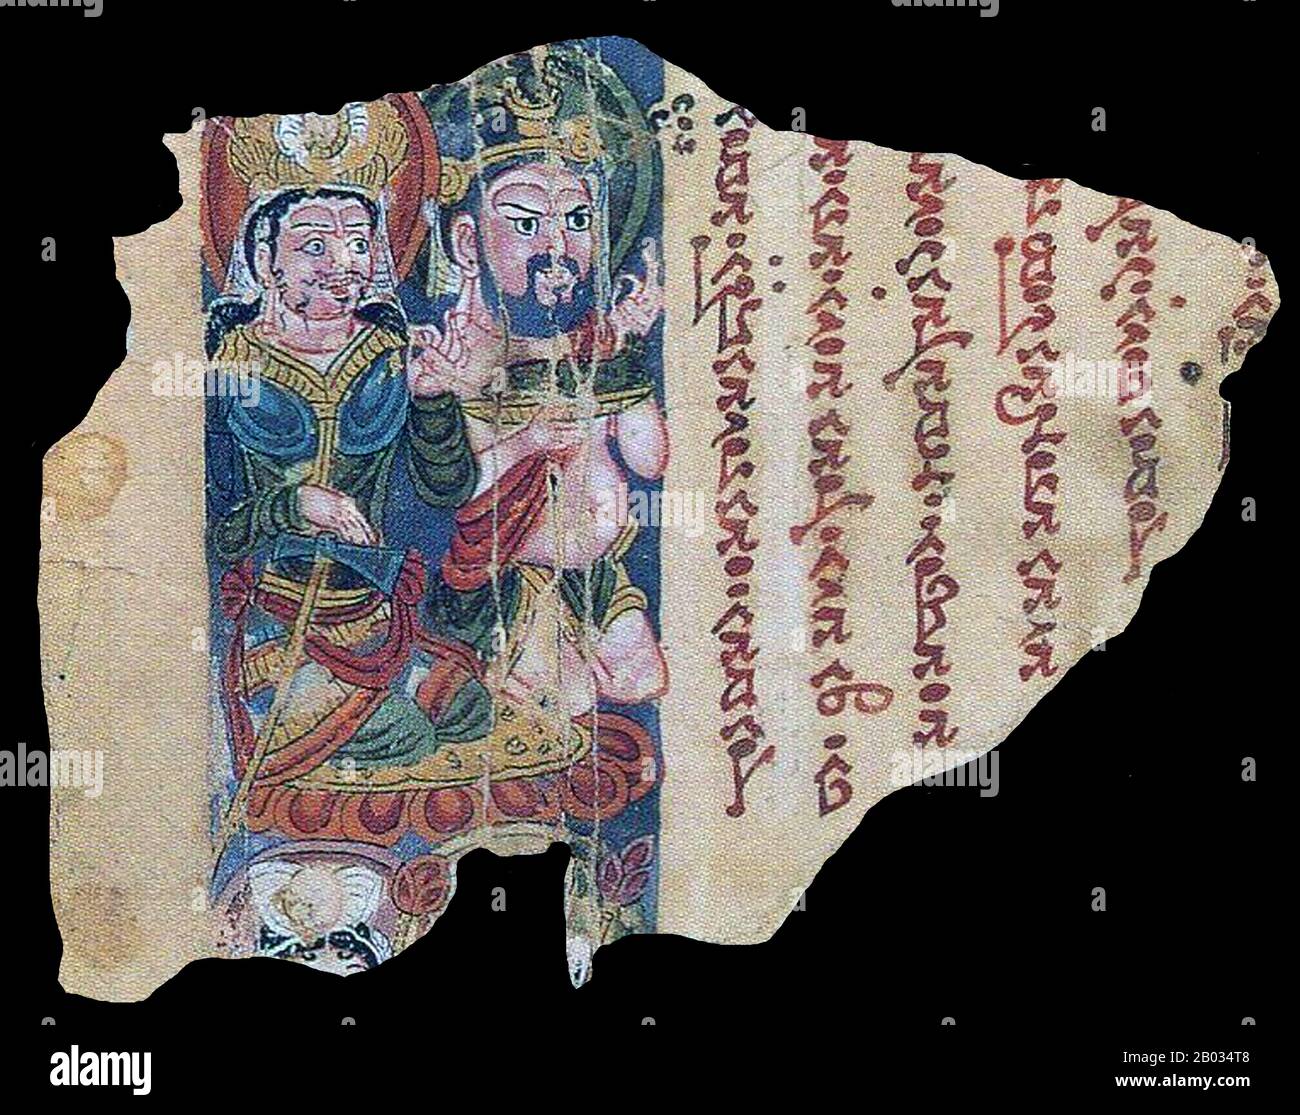 Manichaeism was one of the major Iranian Gnostic religions, originating in Sassanid Persia. Although most of the original writings of the founding prophet Mani (c. 216–276 CE) have been lost, numerous translations and fragmentary texts have survived.  Manichaeism taught an elaborate cosmology describing the struggle between a good, spiritual world of light, and an evil, material world of darkness. Through an ongoing process which takes place in human history, light is gradually removed from the world of matter and returned to the world of light from which it came. Its beliefs can be seen as a Stock Photo